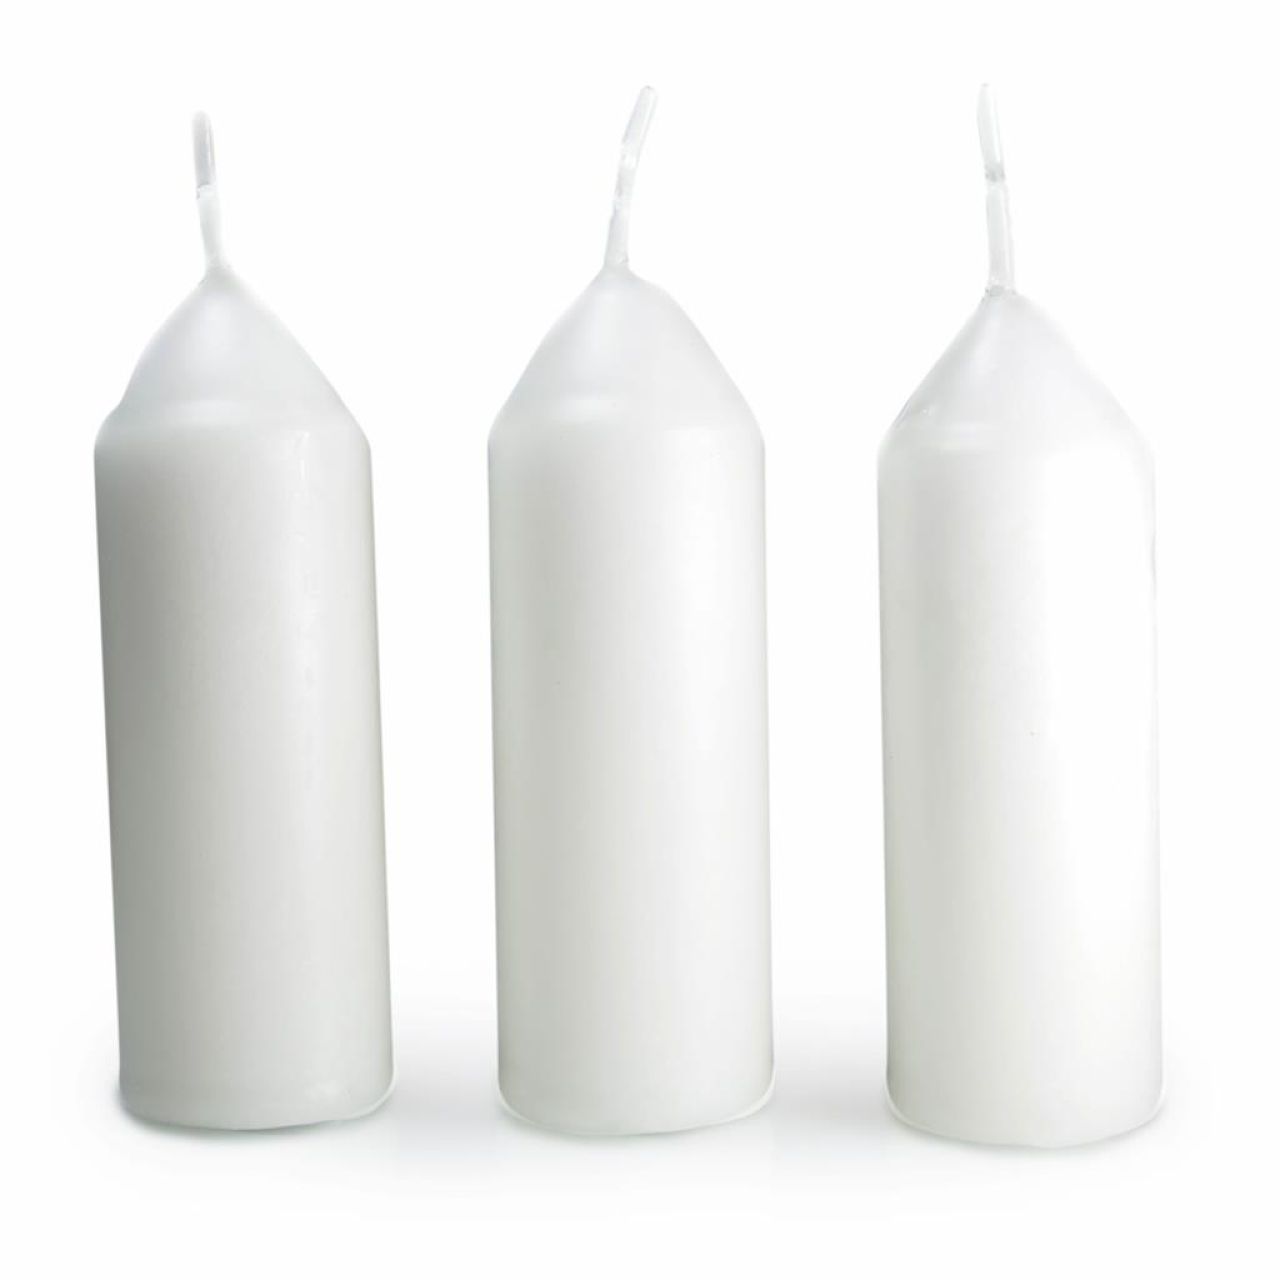 UCO 9 Hour Candles - 3 Pack, Lighting Accessories